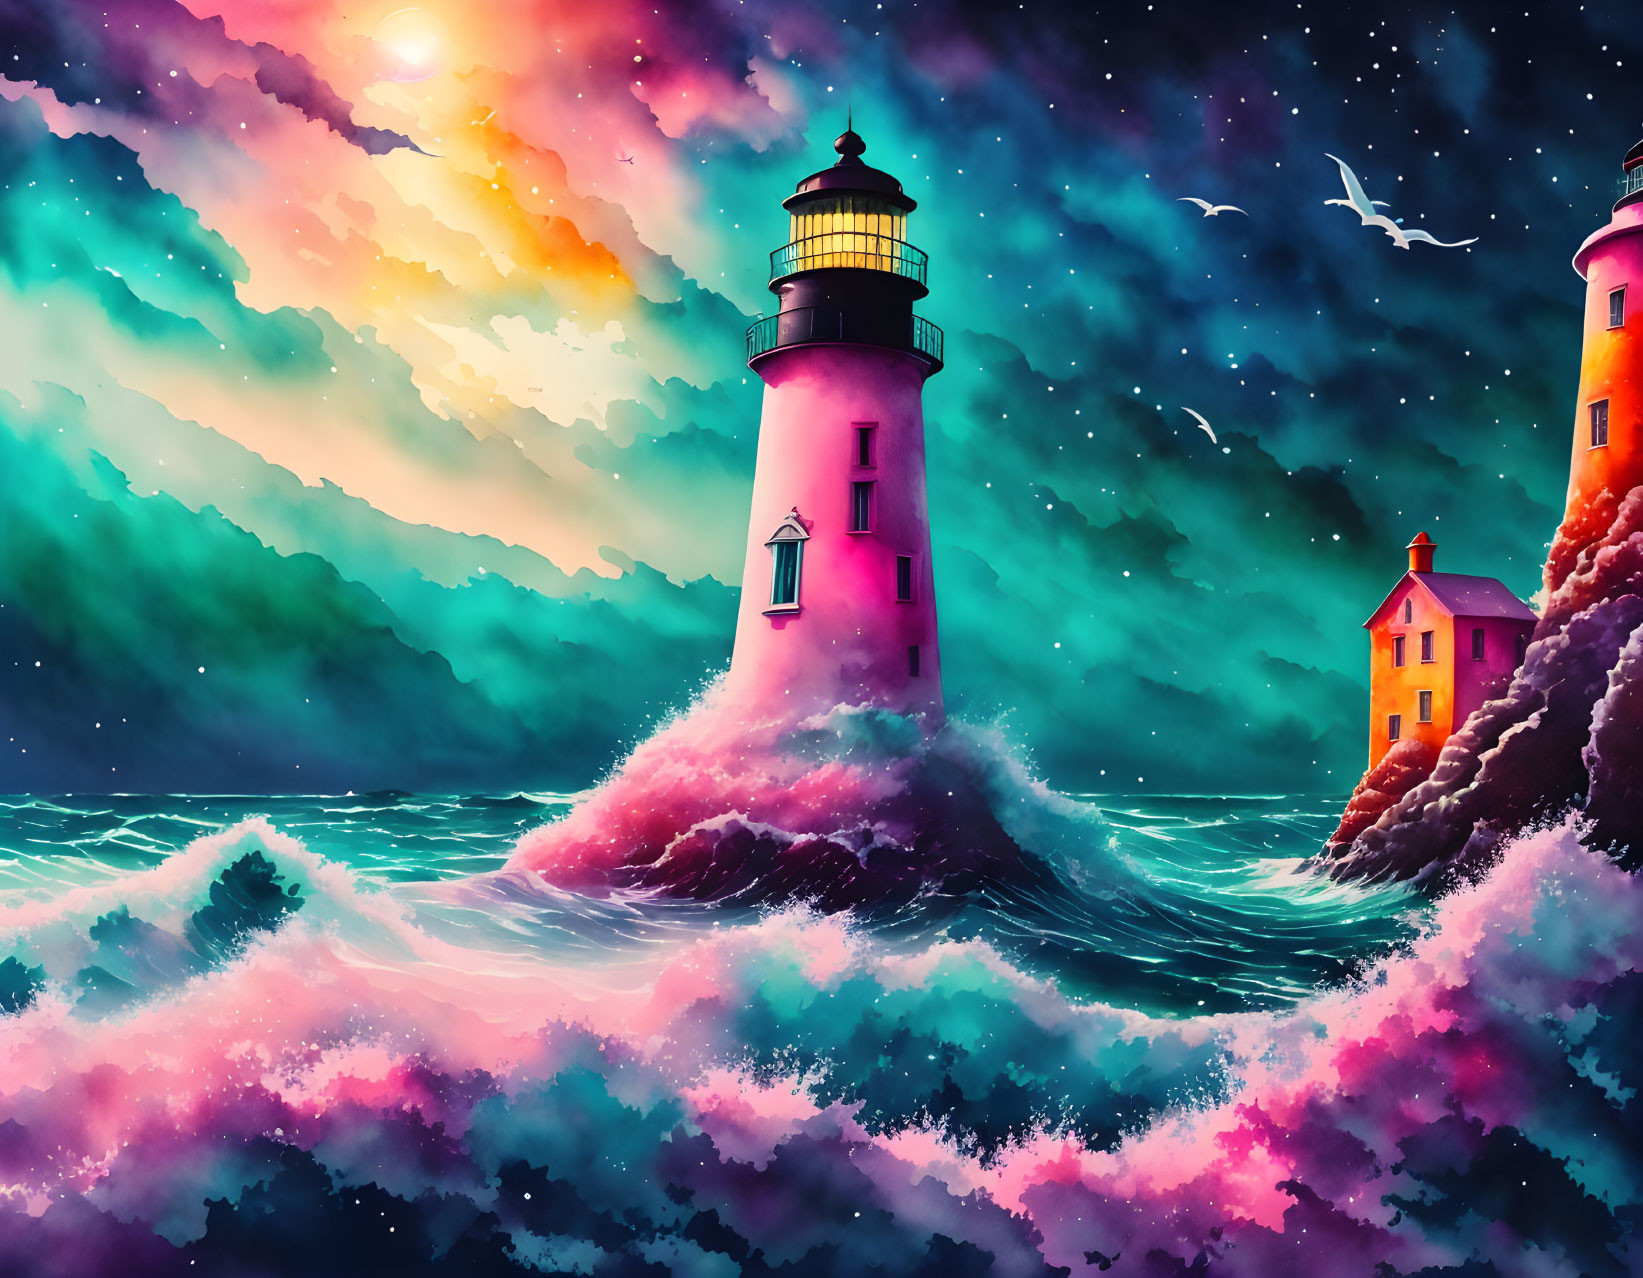 Vibrant digital art: lighthouse on rocky outcrop in tumultuous sea under colorful sunset sky